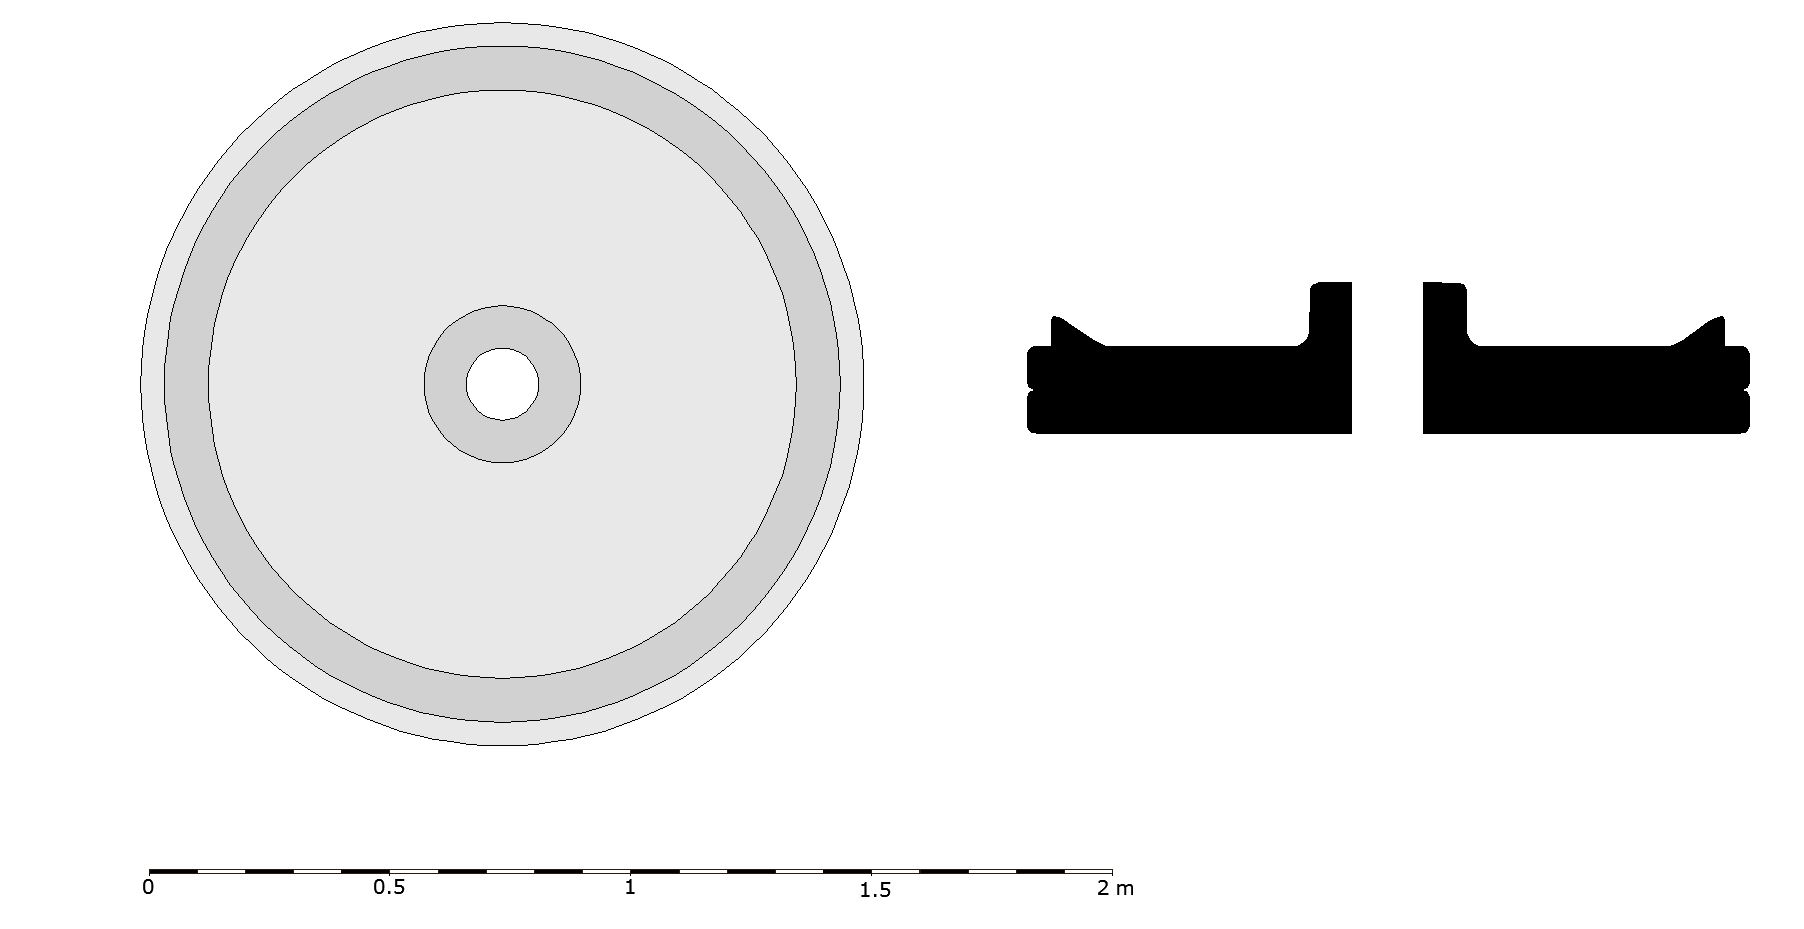 Reconstruction drawing and section of (SW2) – a small circular iron object partly buried under the cargo mound. A scale is included in the image to indicate its original size of about 1.5m.